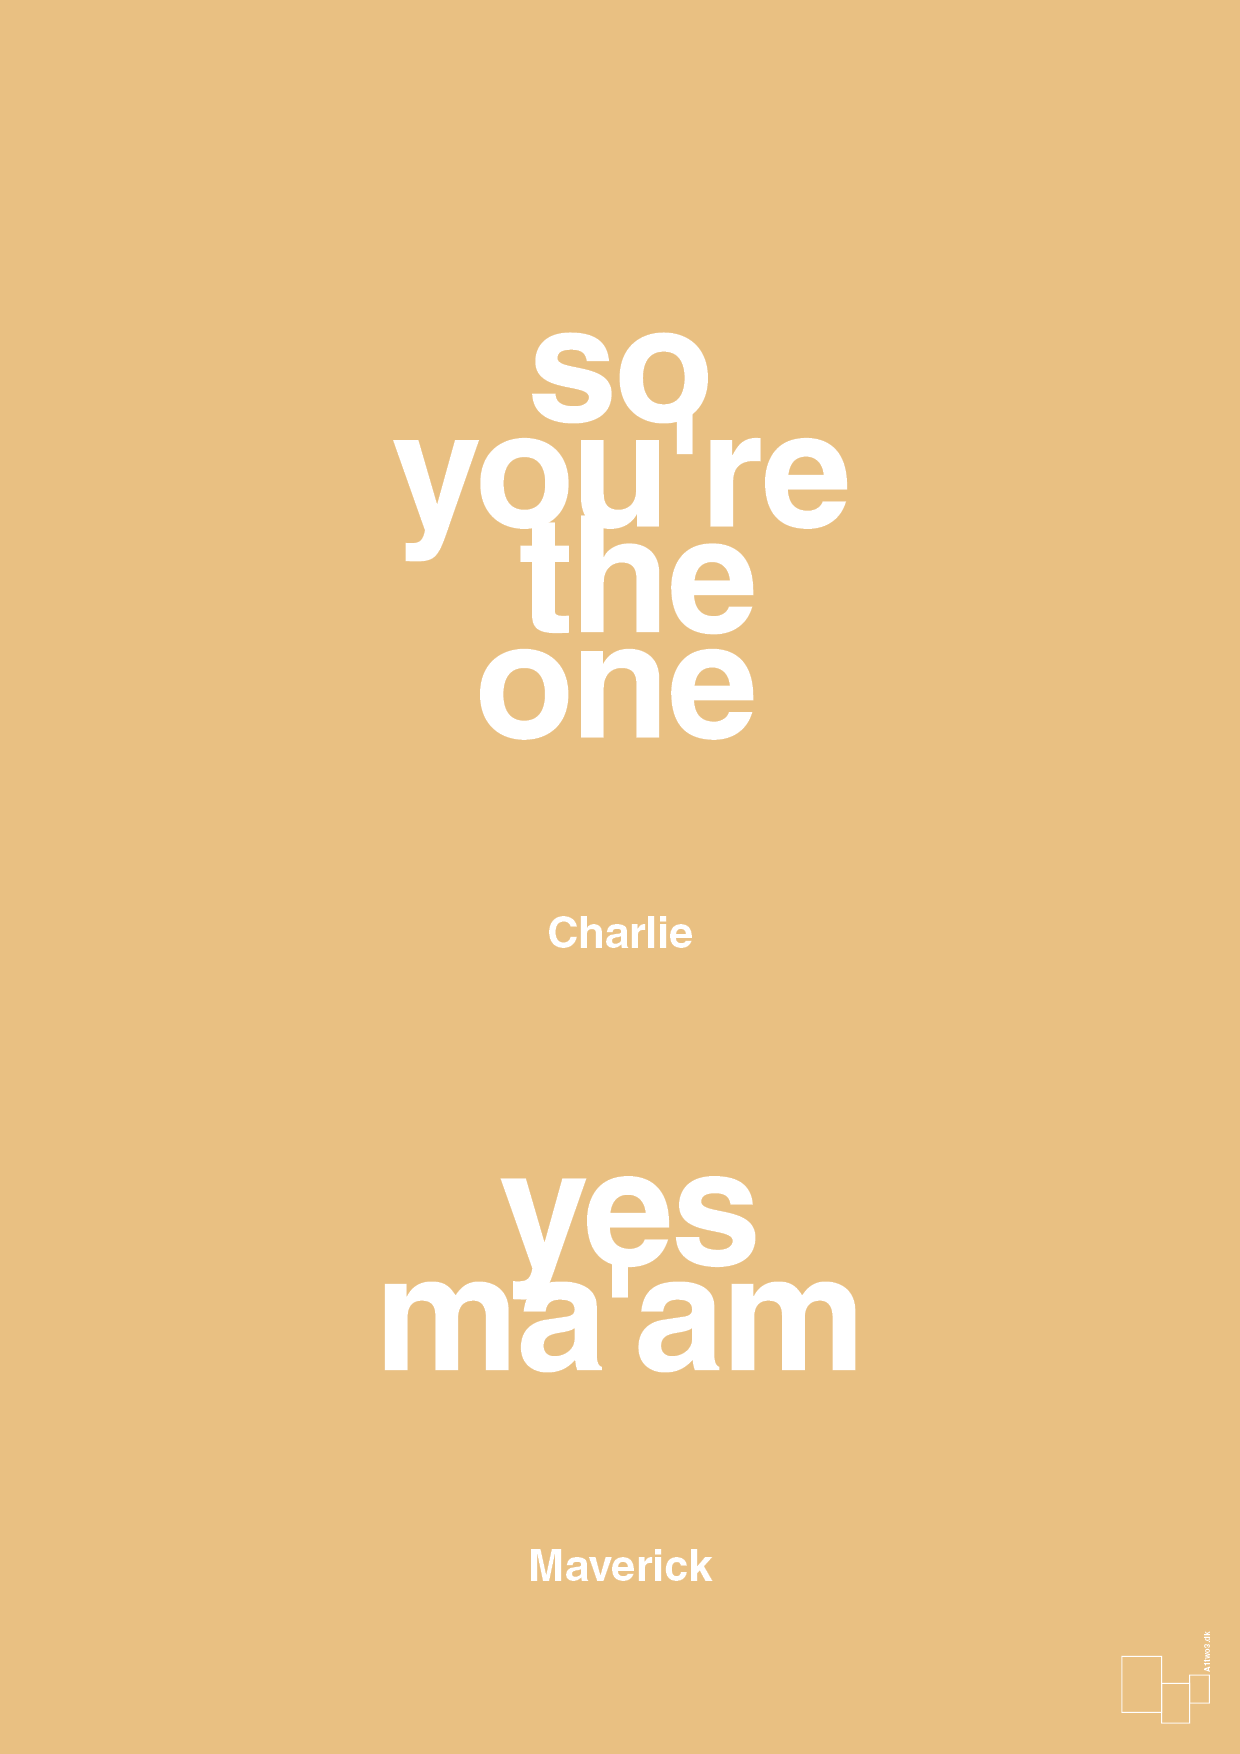 so you're the one - yes ma'am - Plakat med Citater i Charismatic